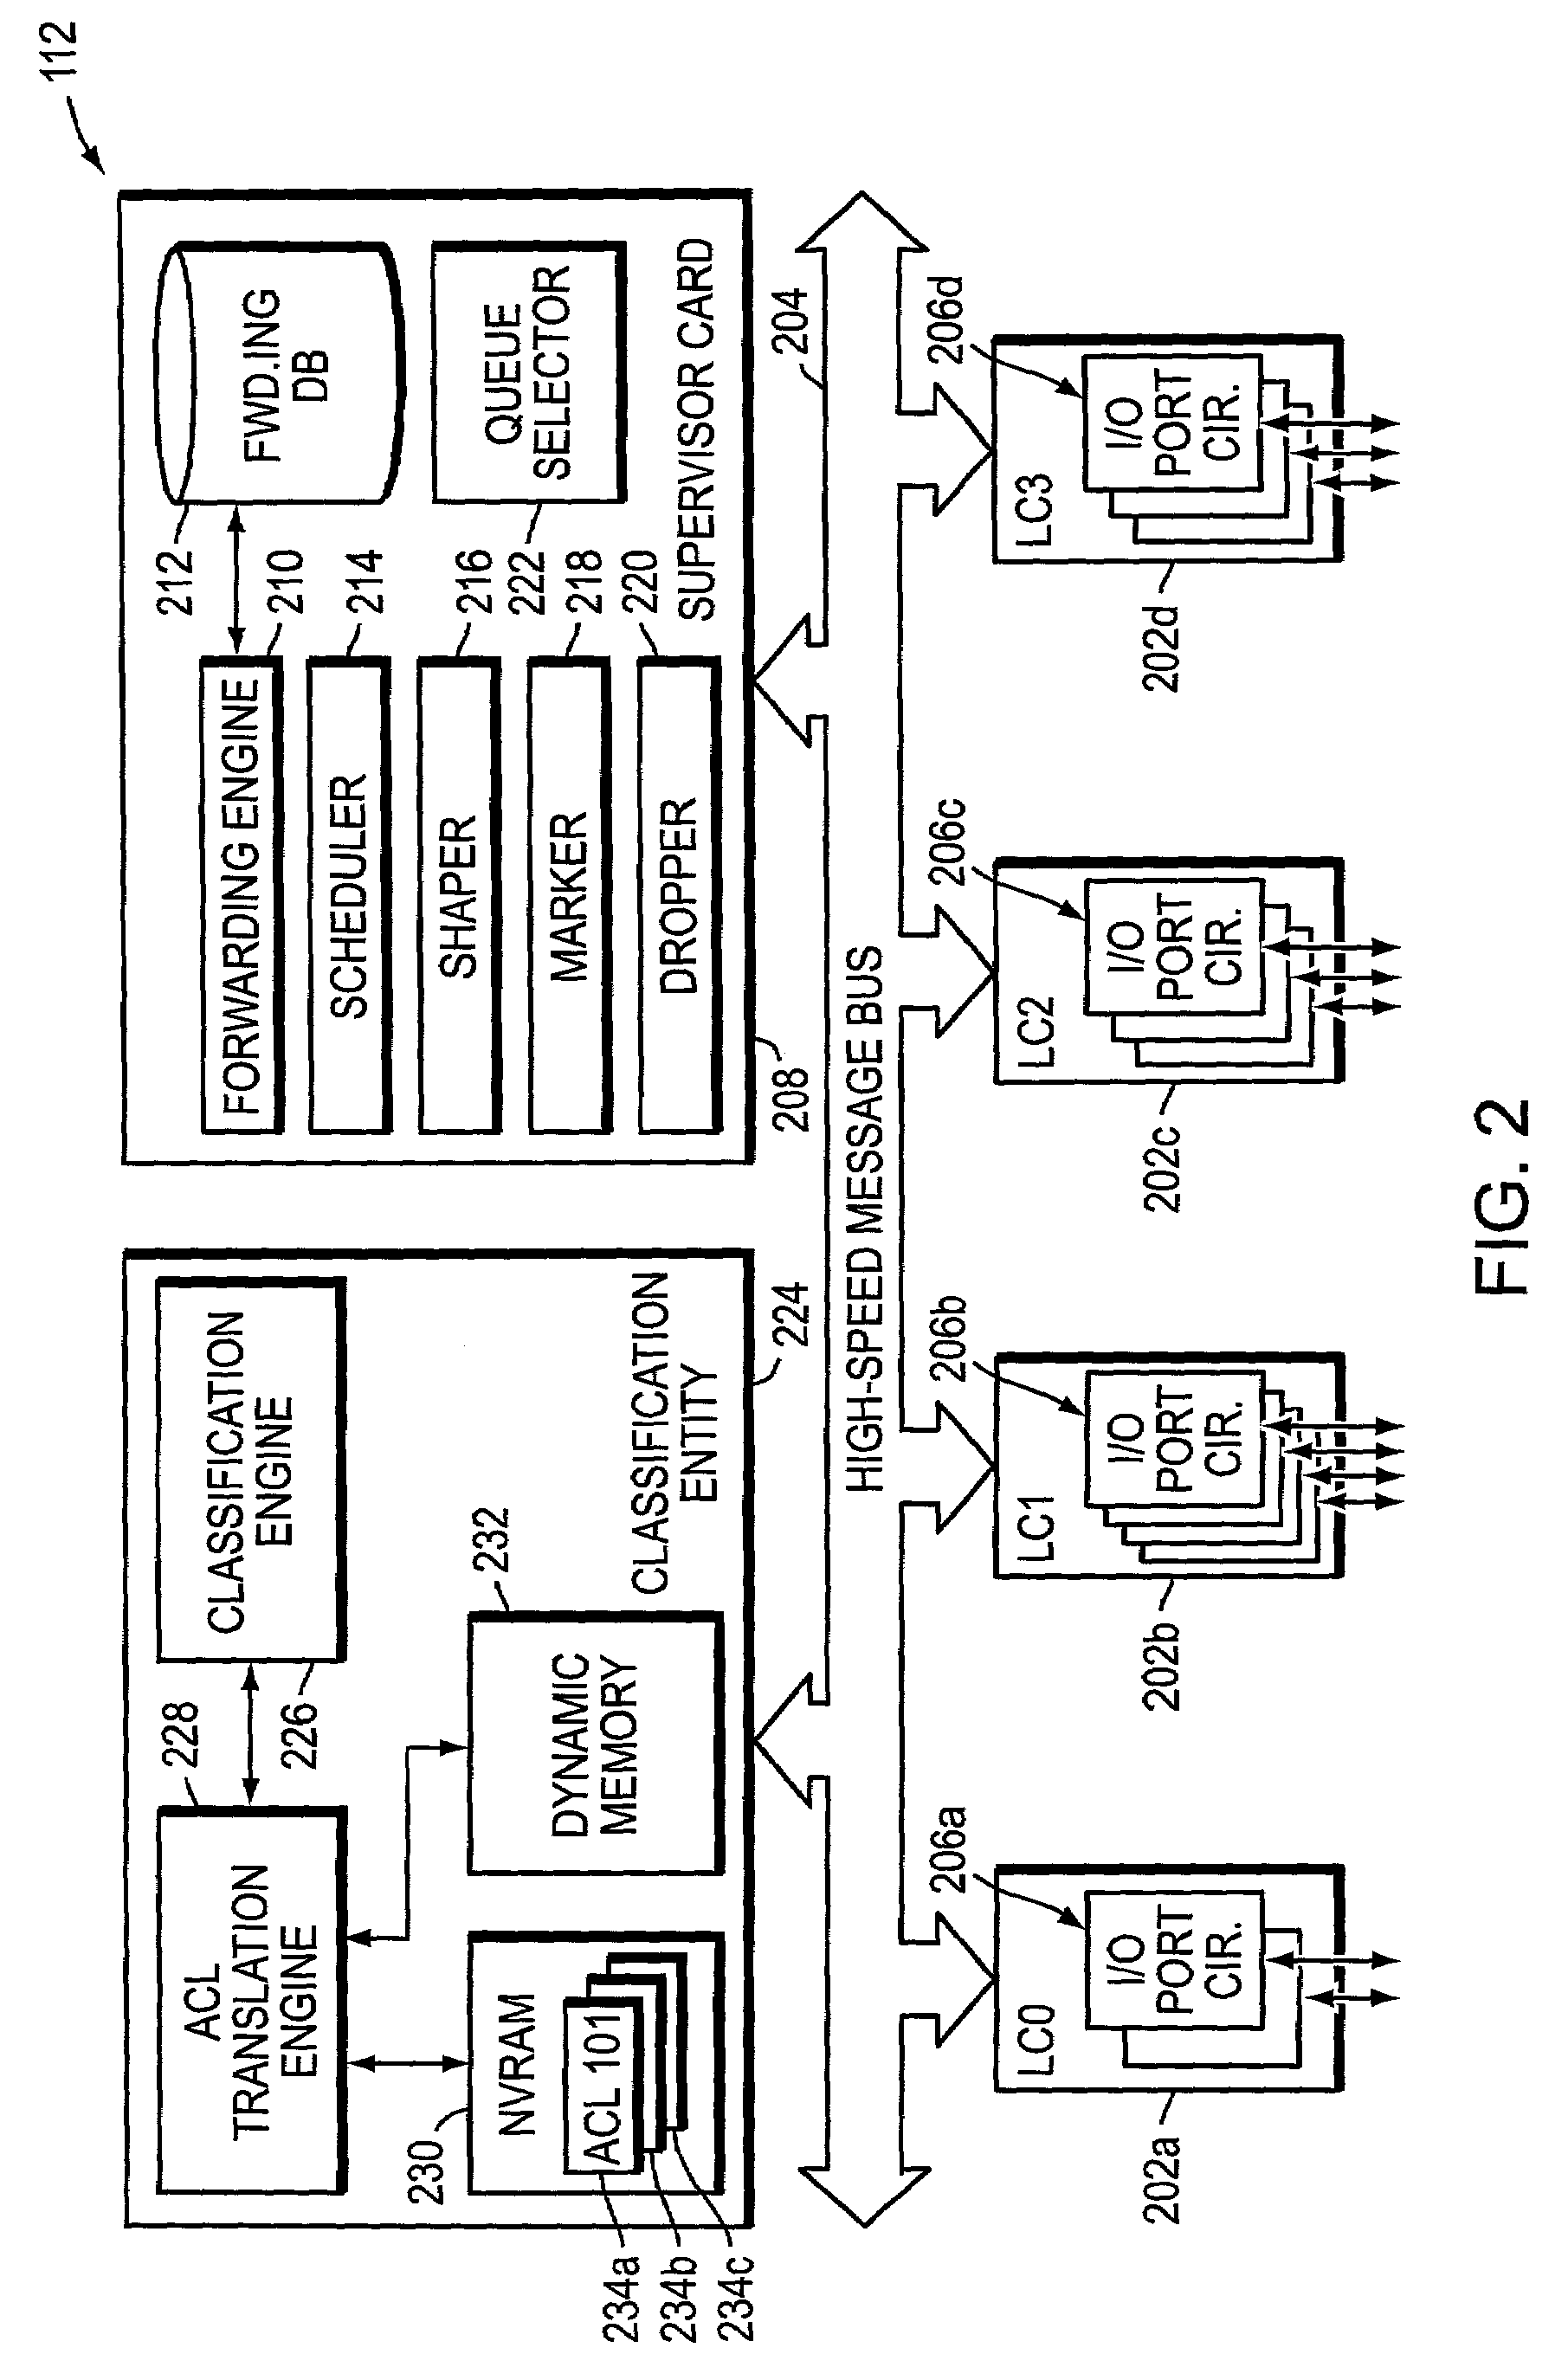 System and method using hierarchical parallel banks of associative memories